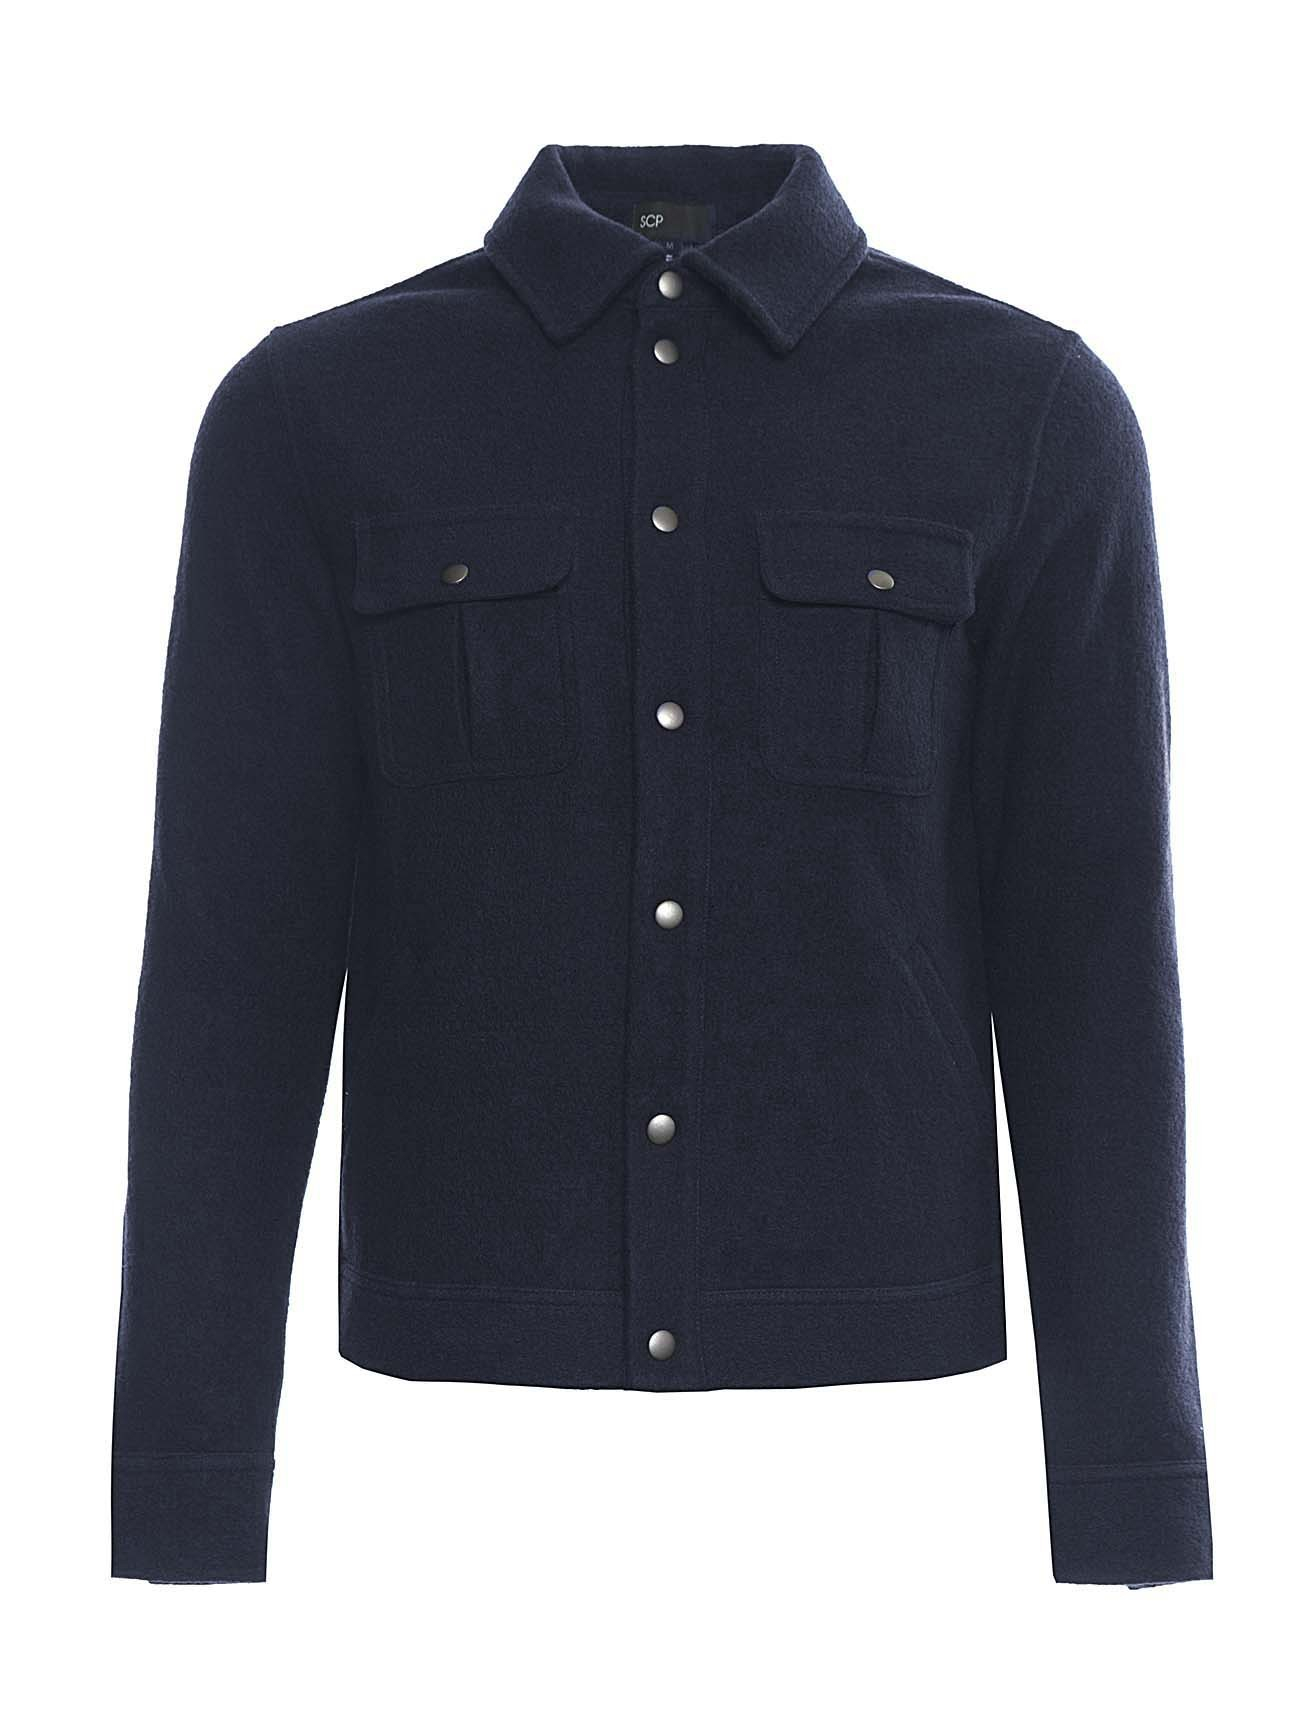 Scp Boiled Wool Cpo Jacket in Blue for Men (NAVY) | Lyst